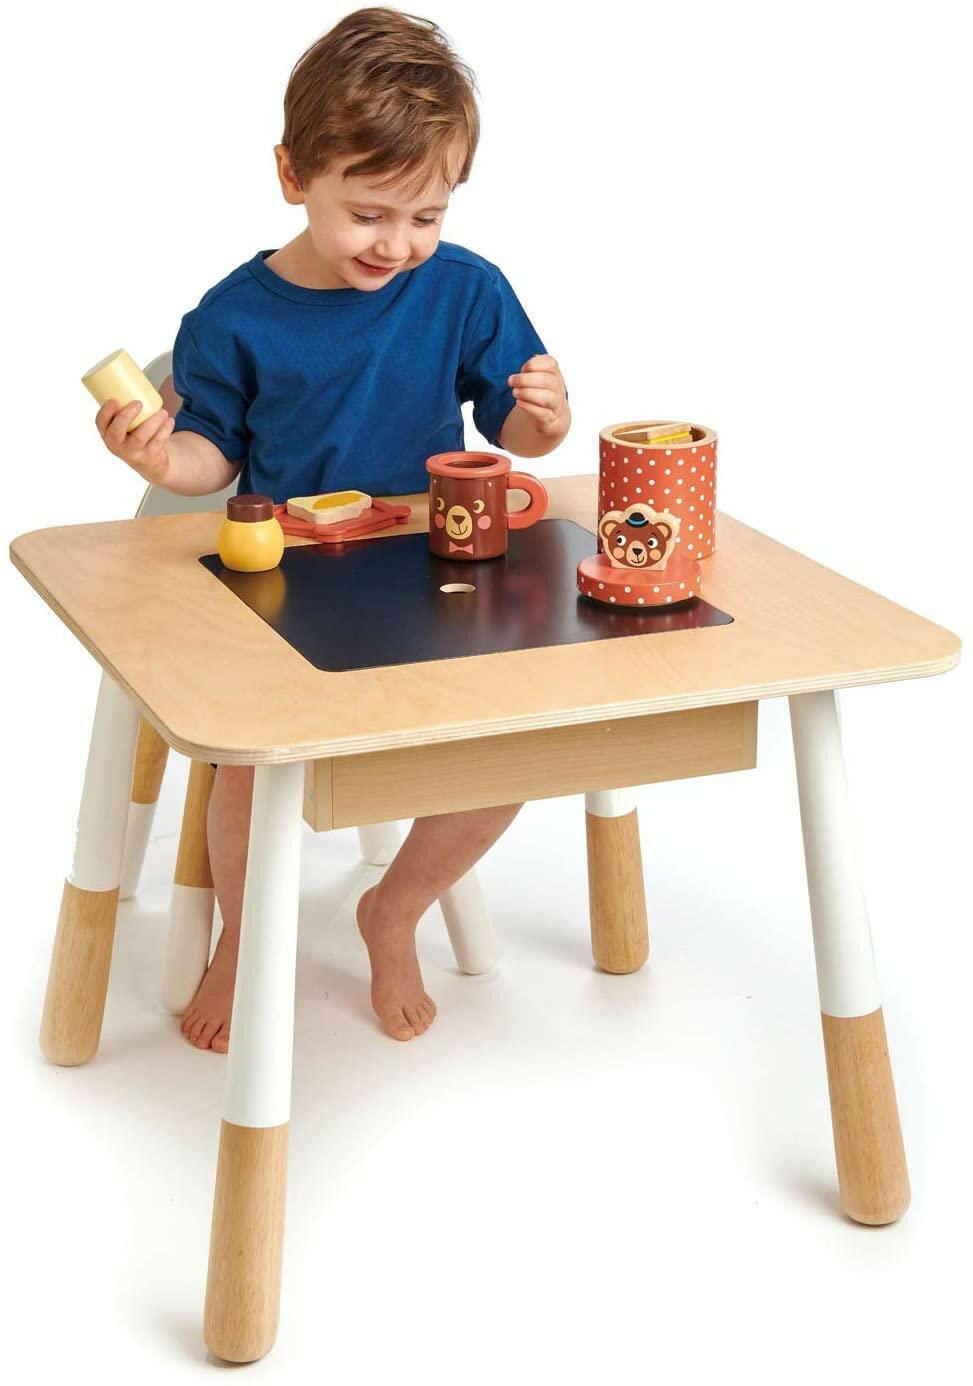 Tender Leaf Toys Forest Table - Traveling Tikes 